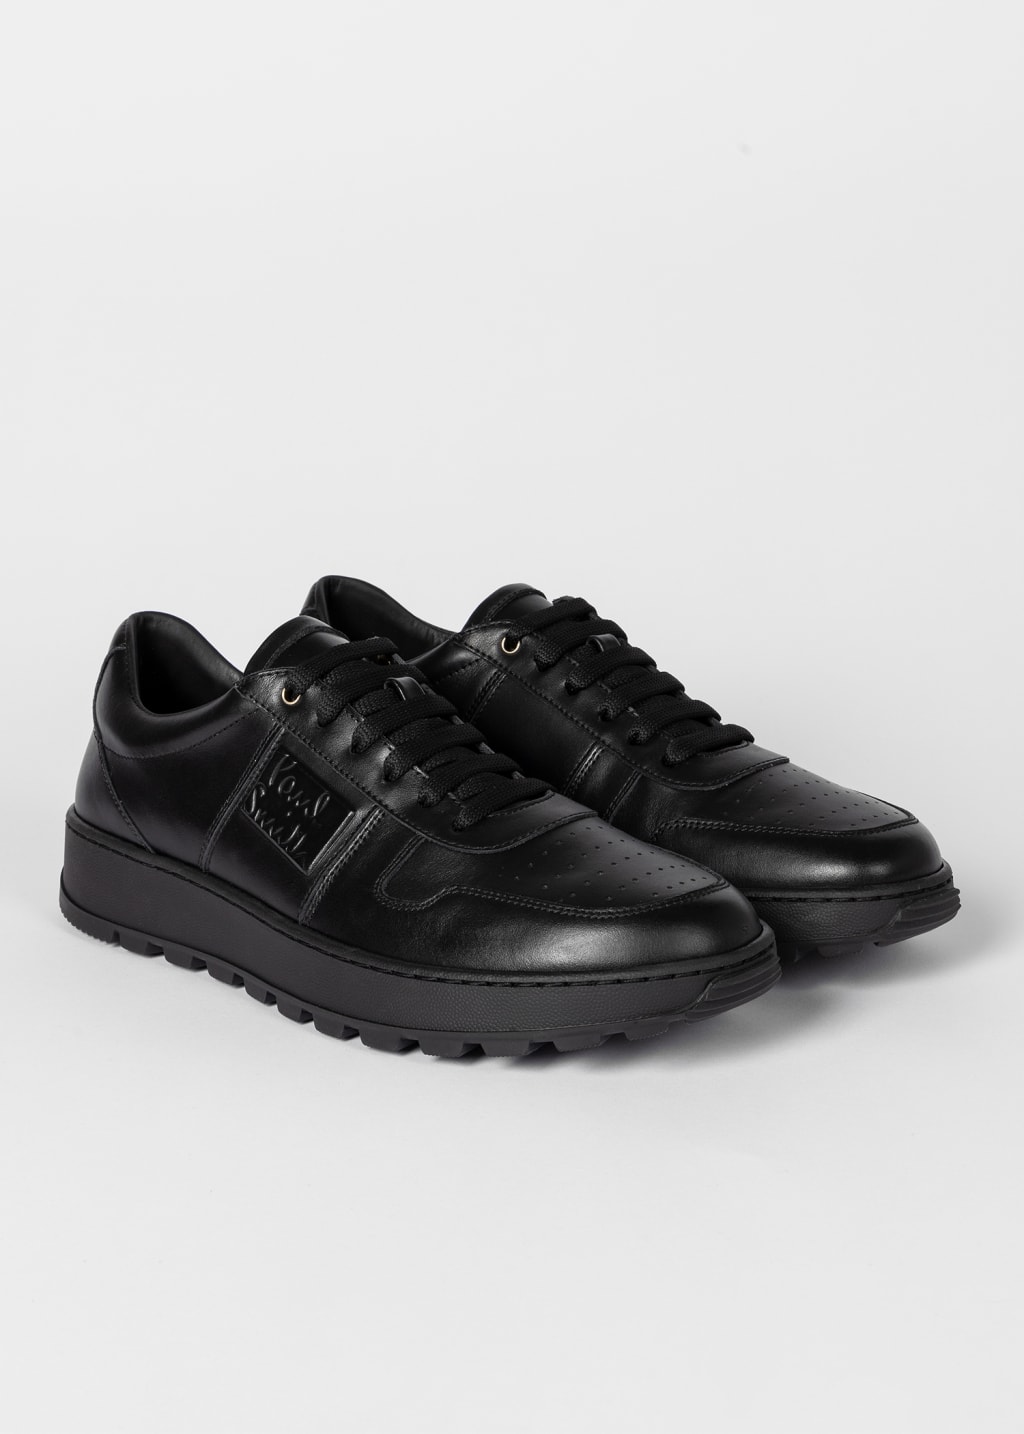 Pair View - Black Leather 'Filoni' Trainers Paul Smith